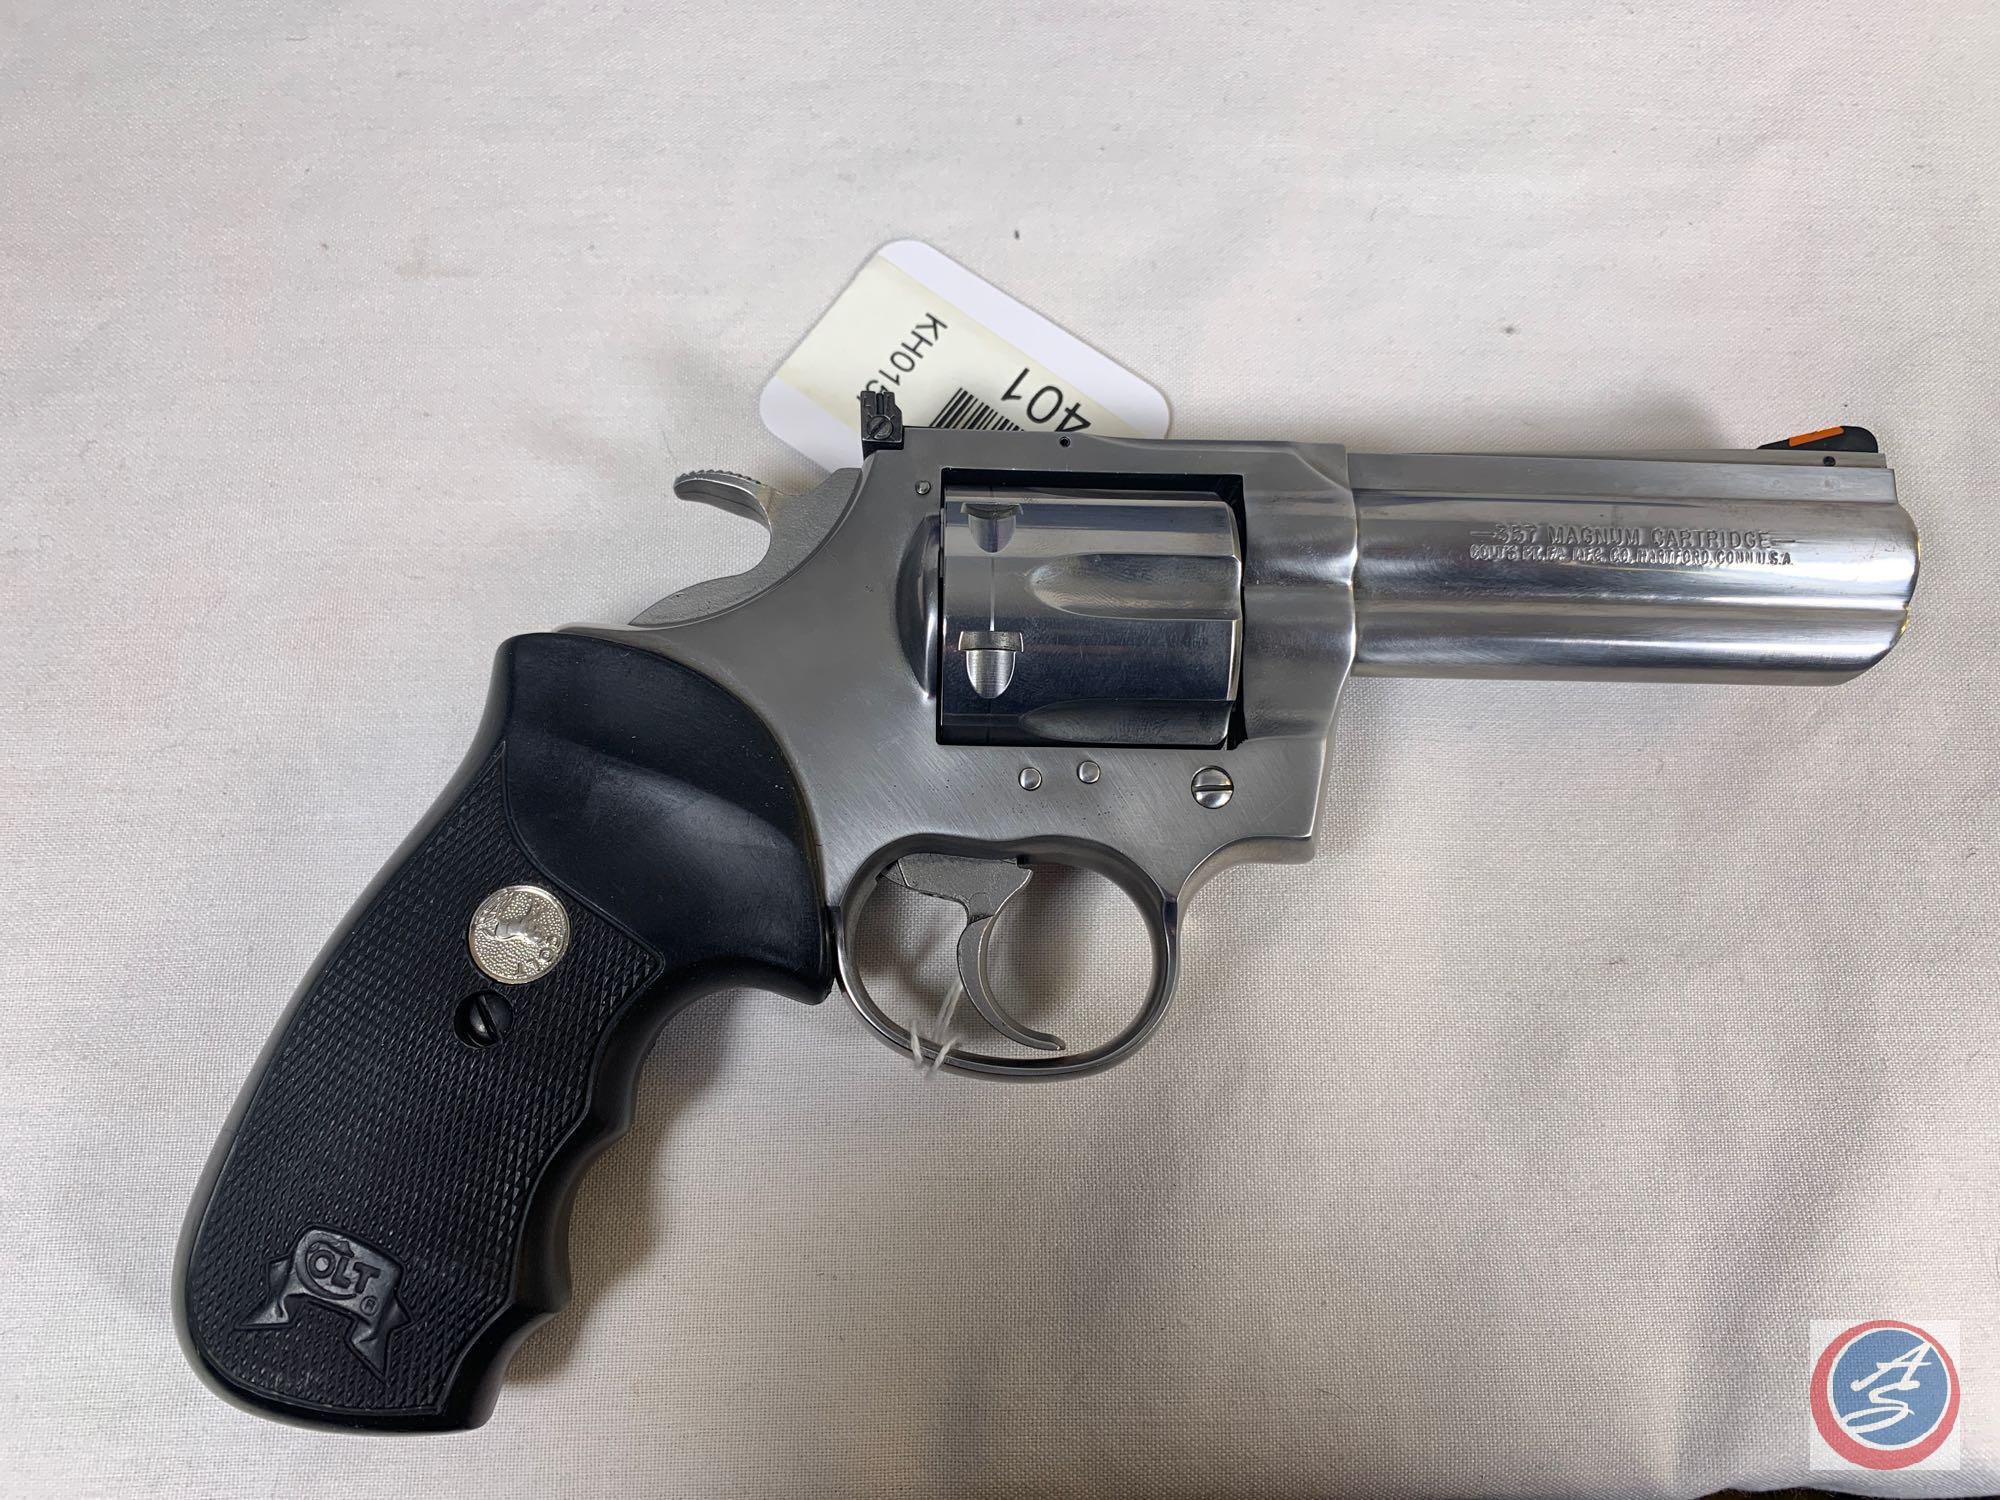 COLT Model King Cobra 357 Magnum Revolver Six Shot Stainless Steel Double Action Revolver with 4